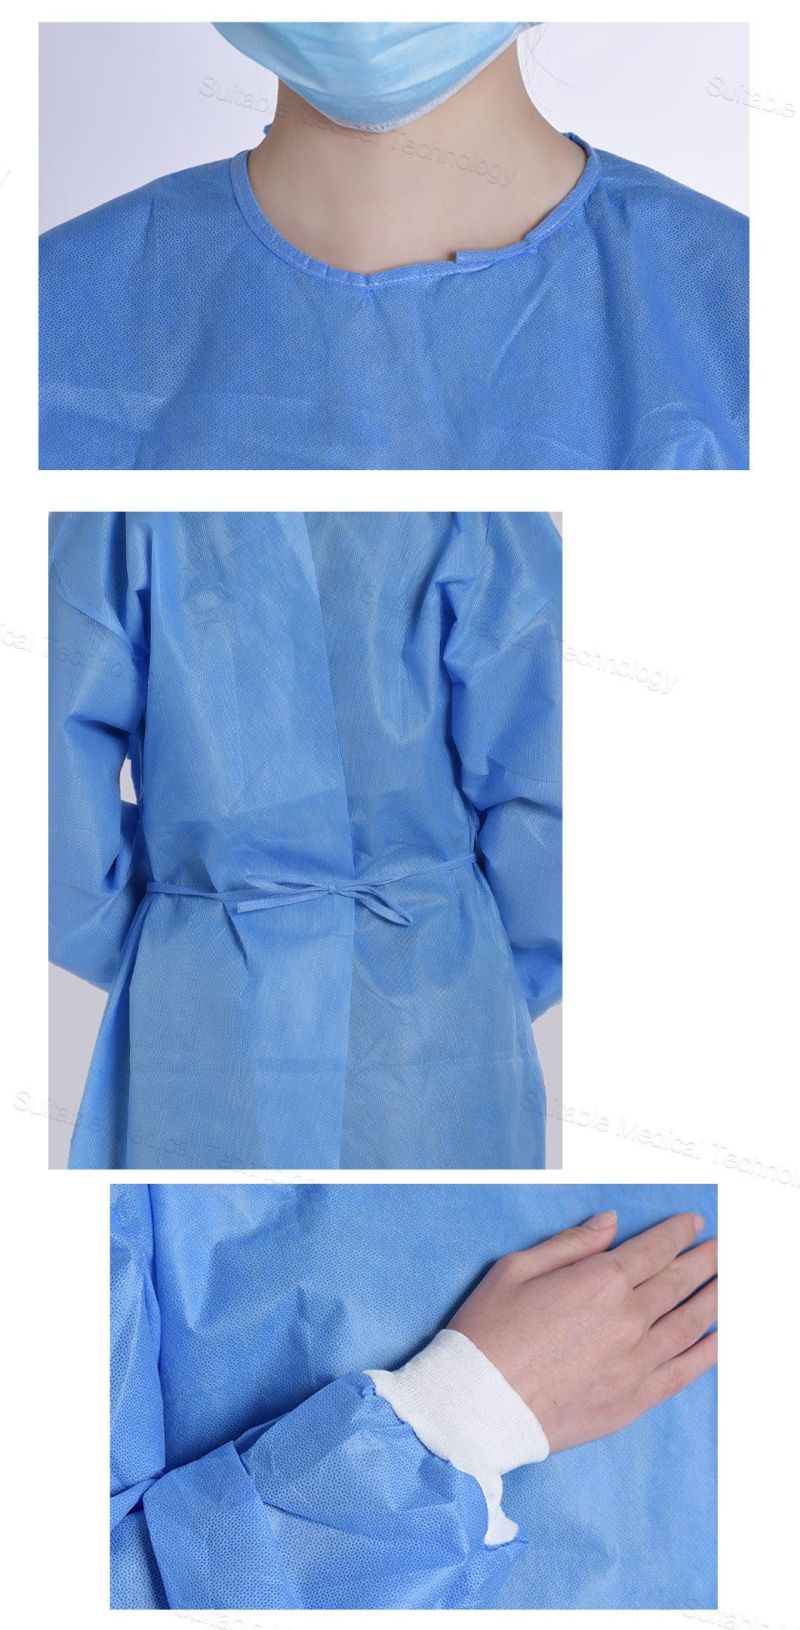 FDA Approved Medical Isolation Gown Surgical Safety Disposable Protective Clothing